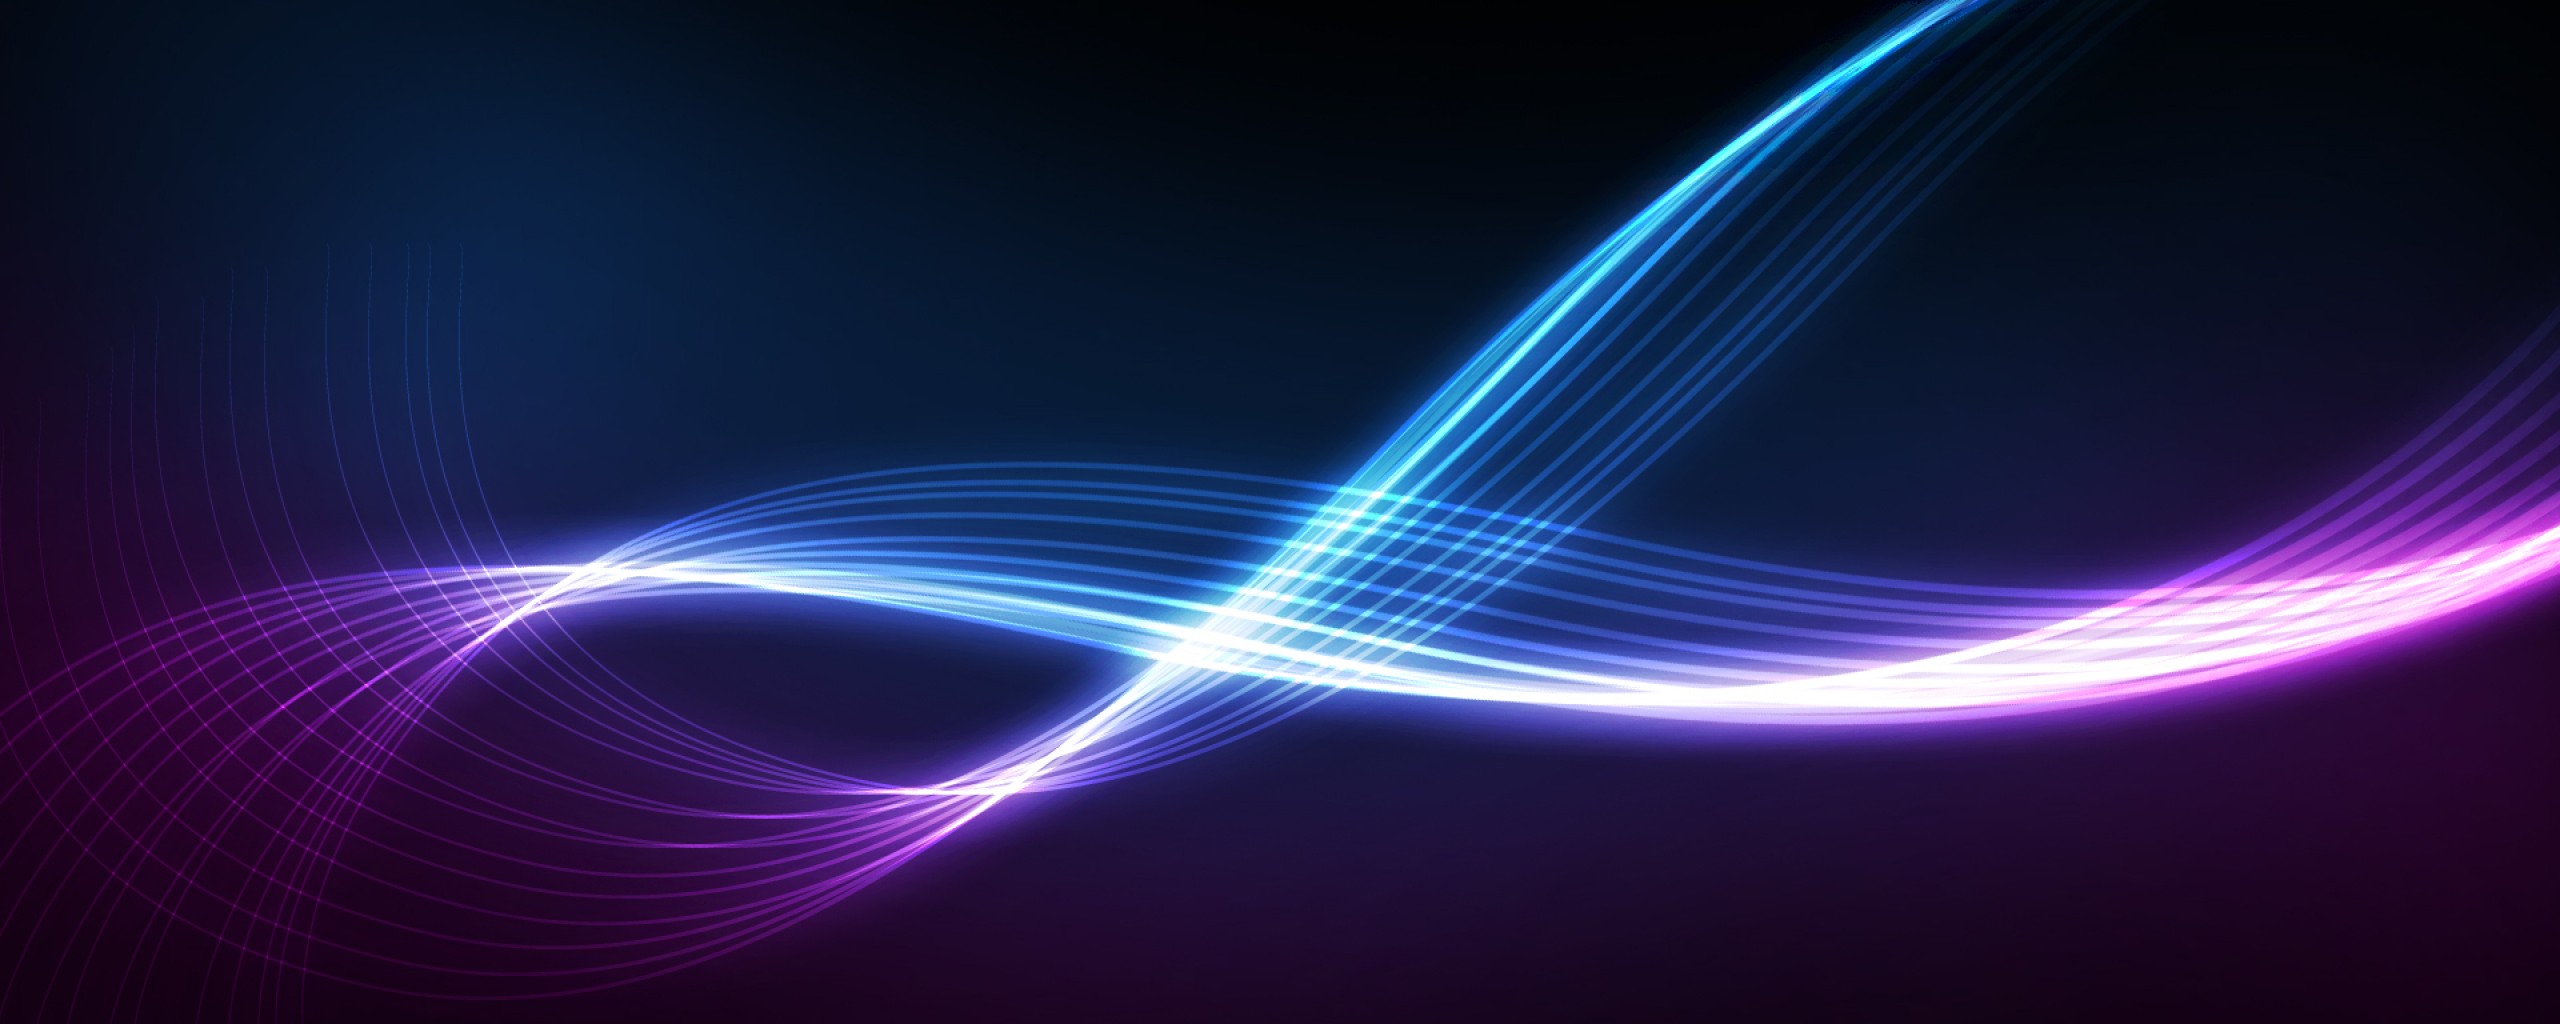 Purple Background Photos Download The BEST Free Purple Background Stock  Photos  HD Images